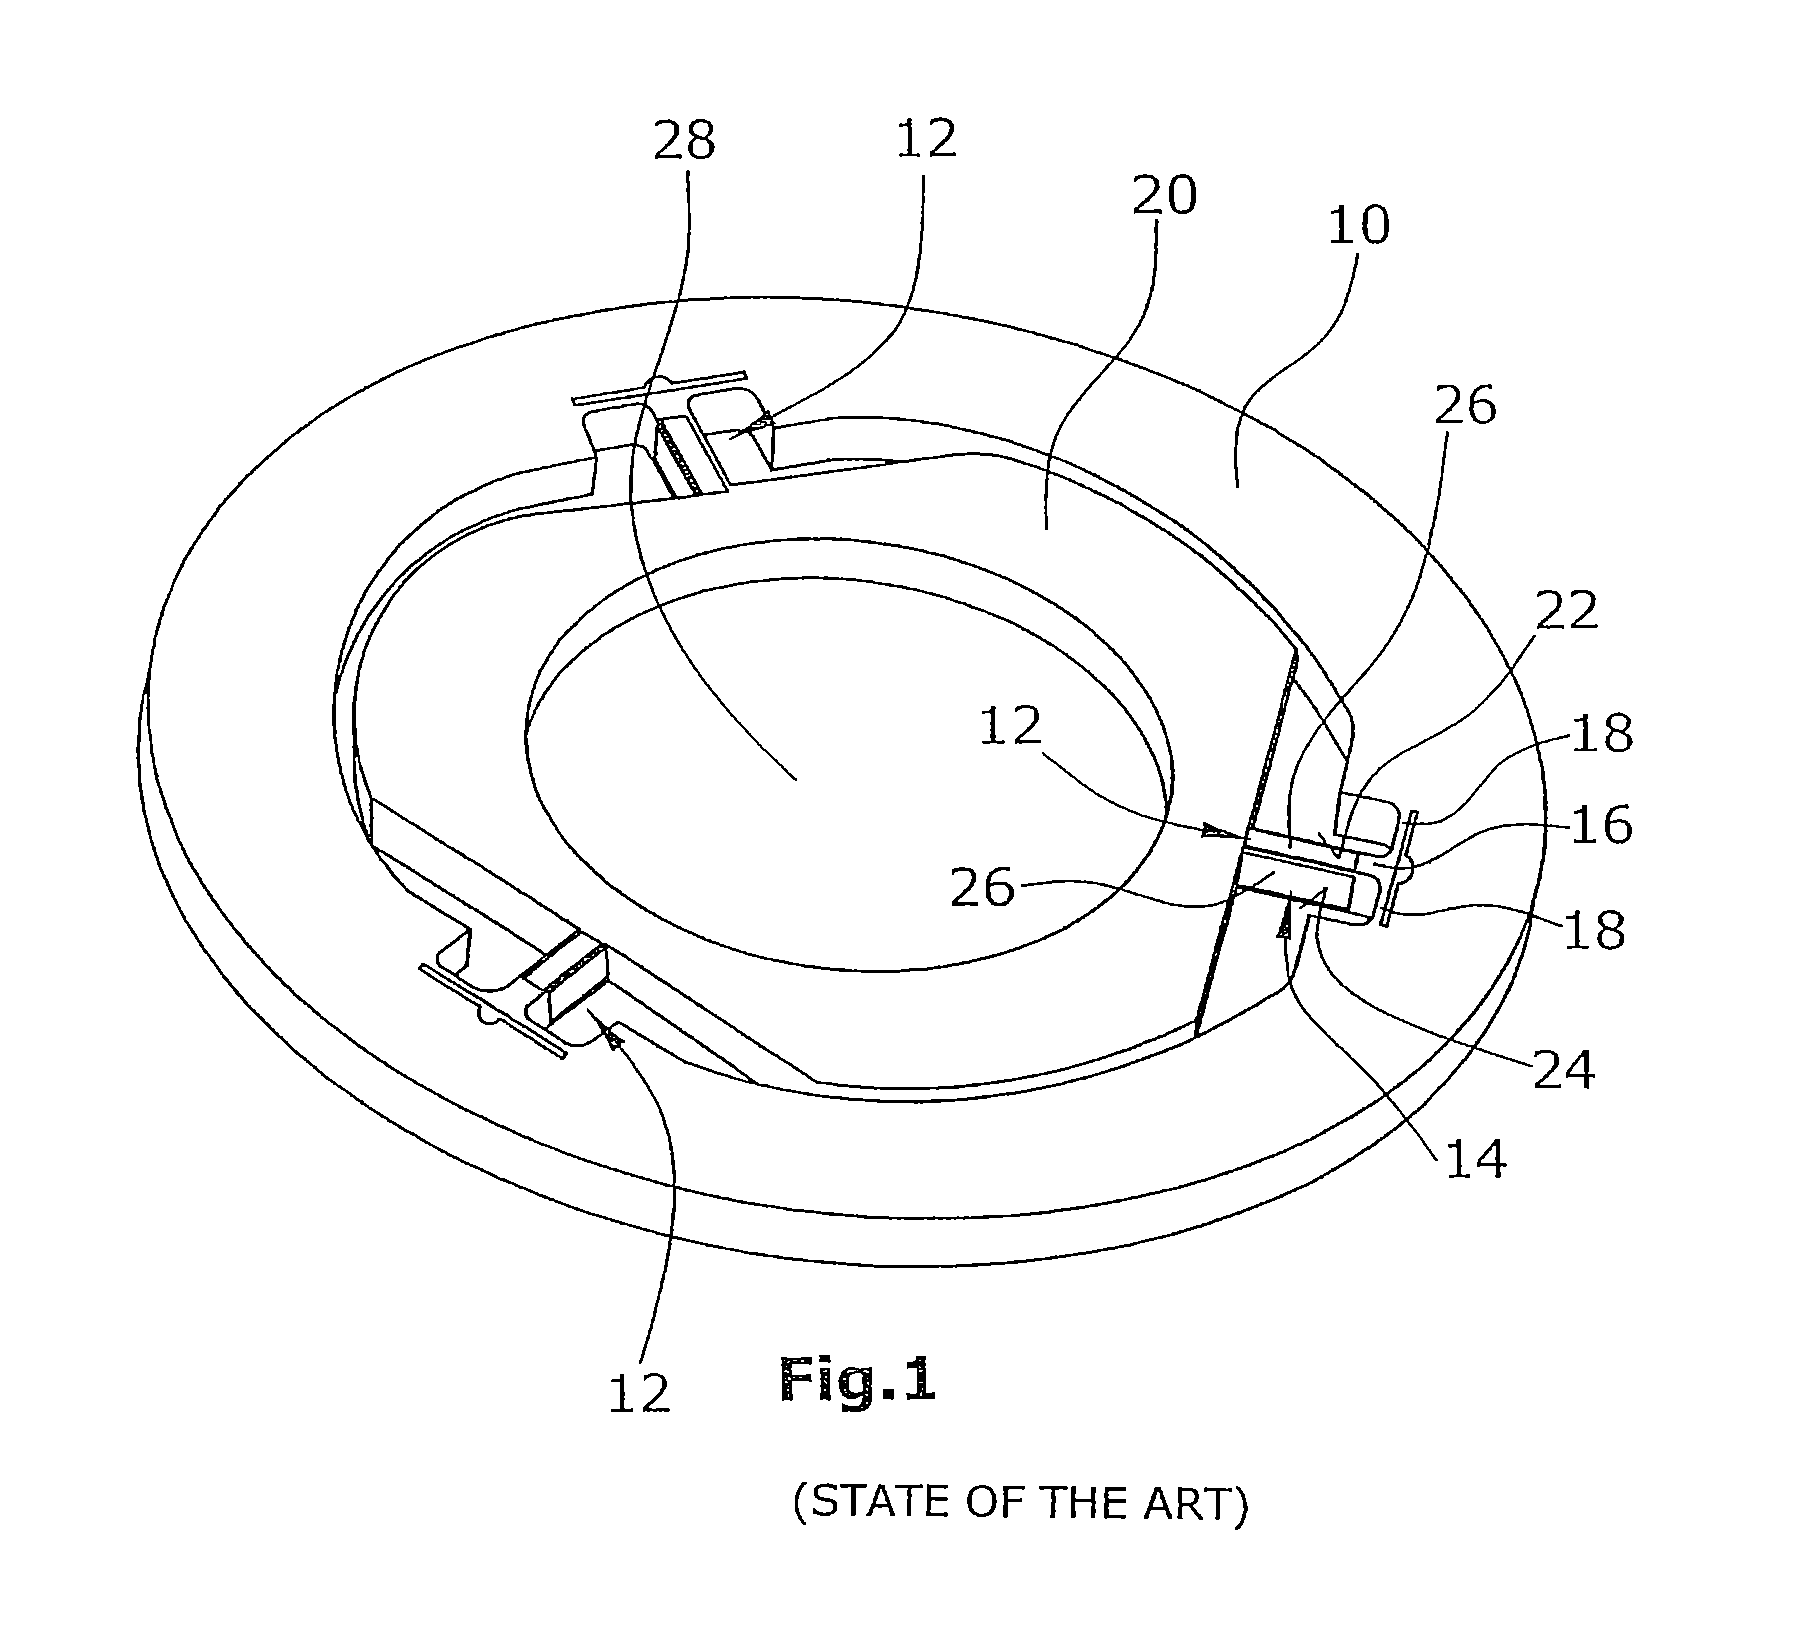 Force/moment sensor for measurement of forces and moments